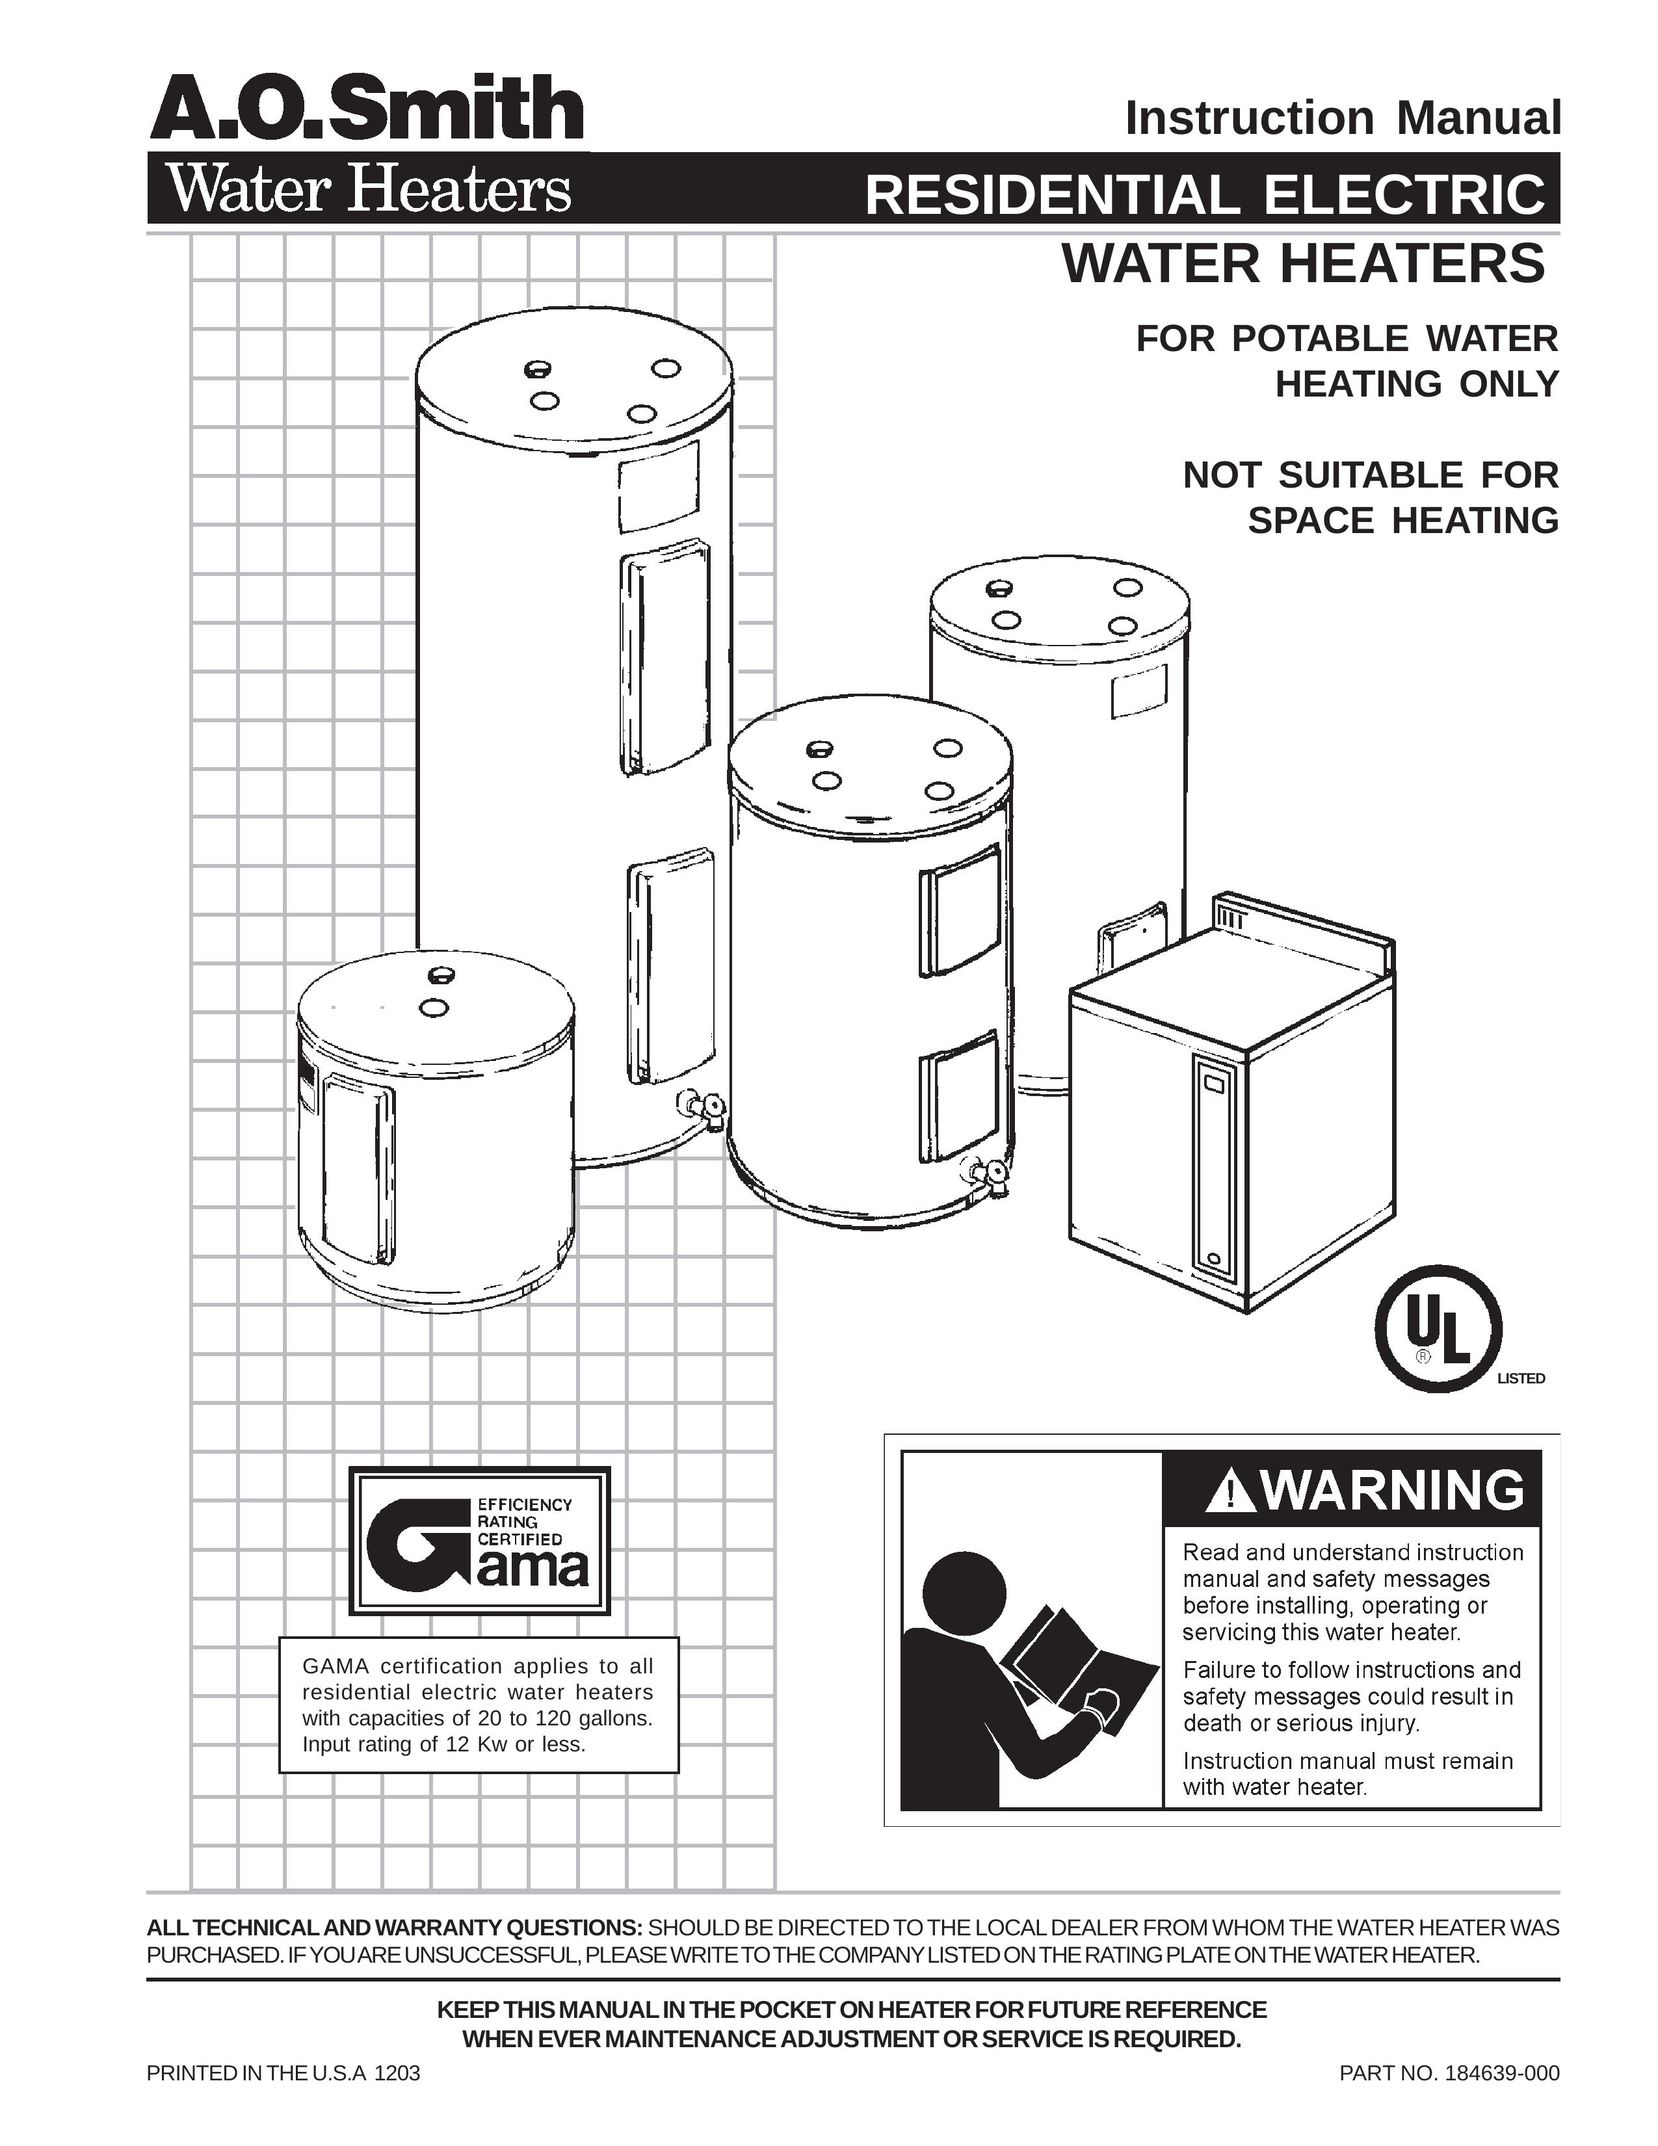 A.O. Smith WATER HEATERS Electric Heater User Manual